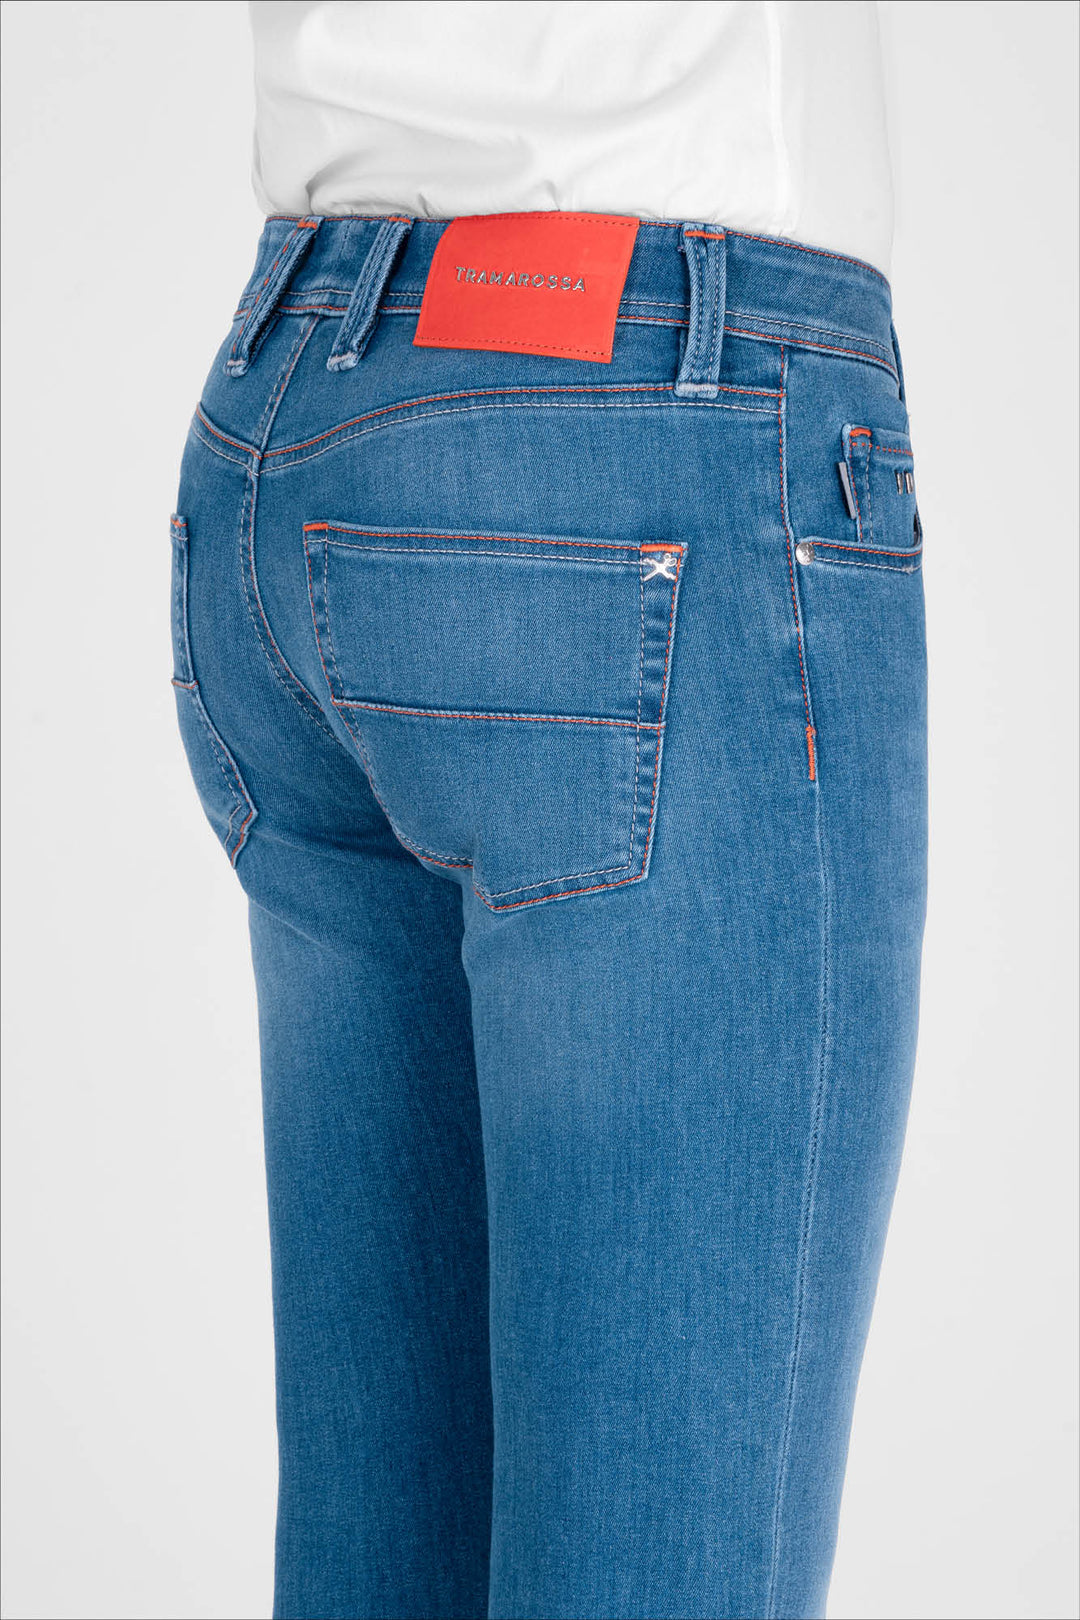 Blue jeans with orange contrast